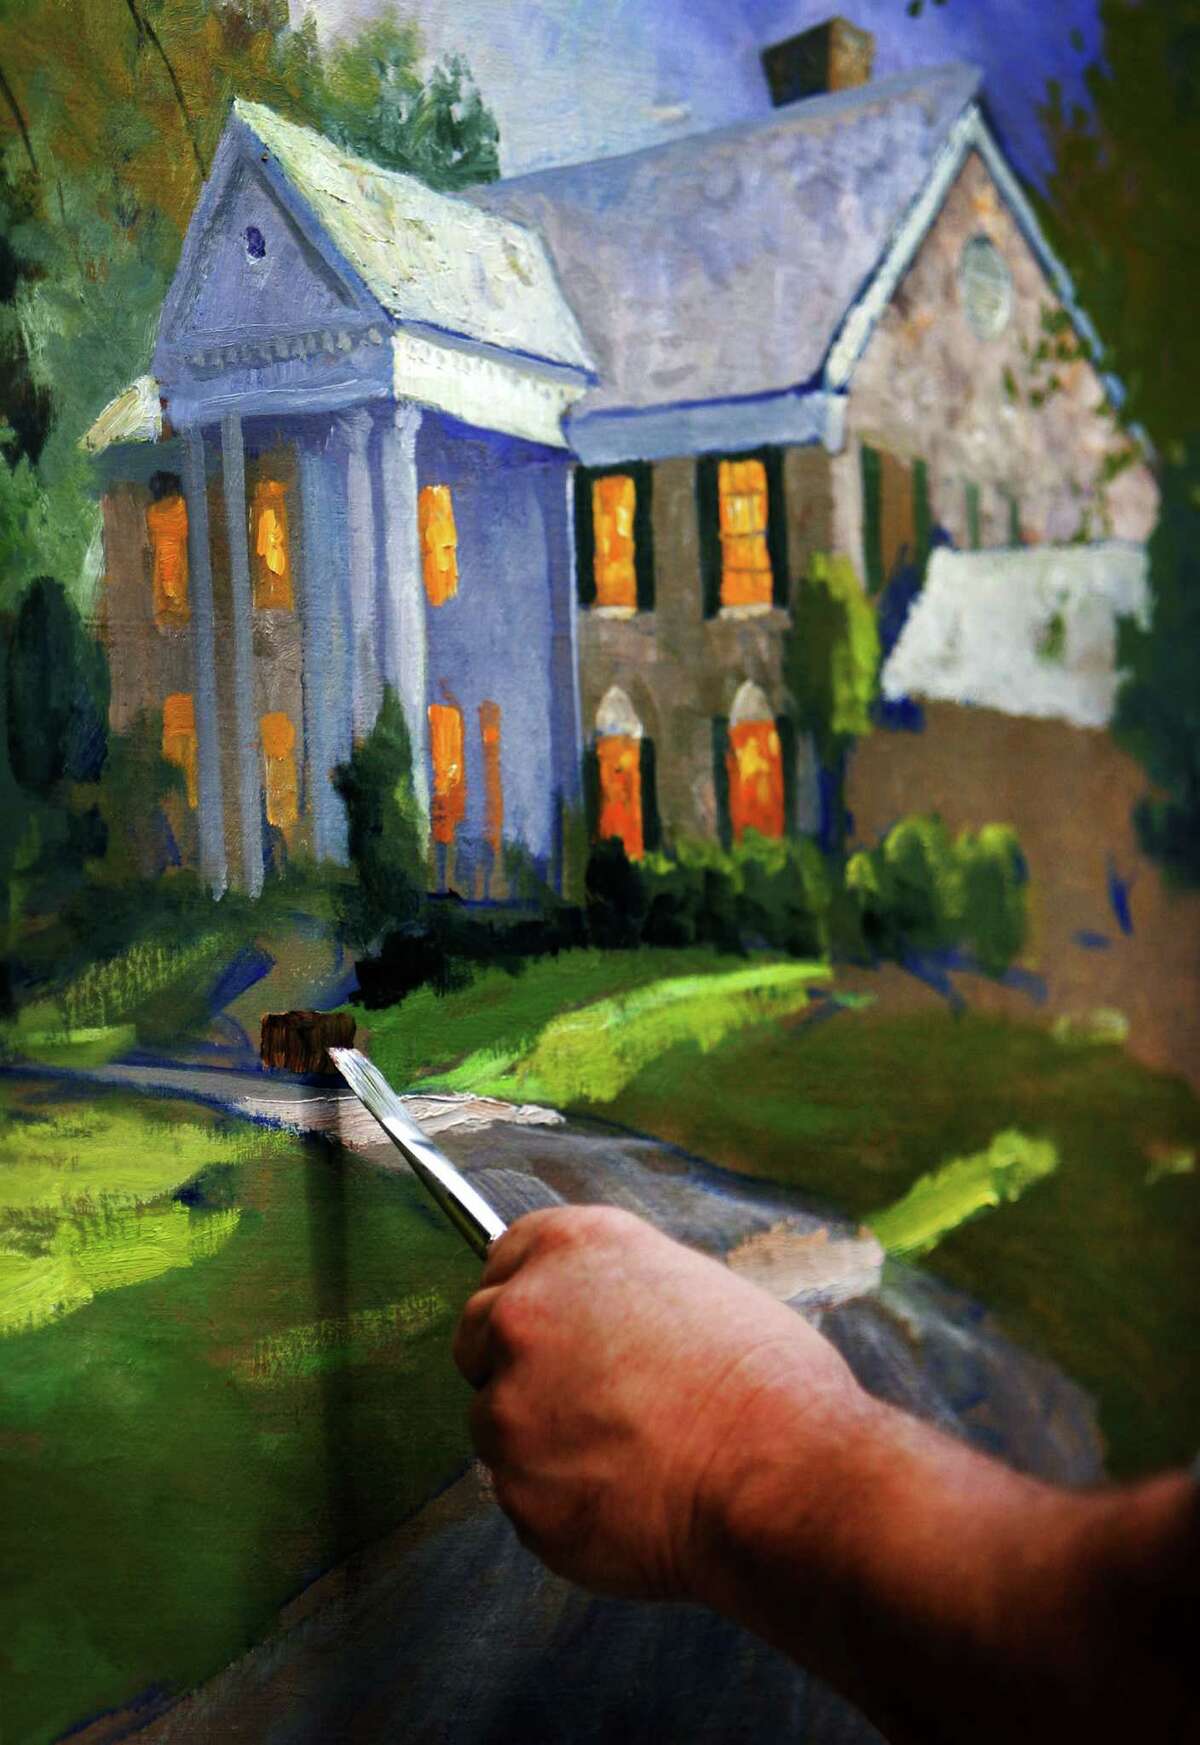 FILE - In this Sept. 22, 2006 file photo, artist Thomas Kinkade works on a study of Graceland in Memphis, Tenn. Kinkade, whose brushwork paintings of idyllic landscapes, cottages and churches have been big sellers for dealers across the United States, died Friday, April 6, 2012, a family spokesman said. (AP Photo/The Commercial Appeal, Jim Weber, File) MEMPHIS OUT, MAGS OUT, TV OUT, NO SALES